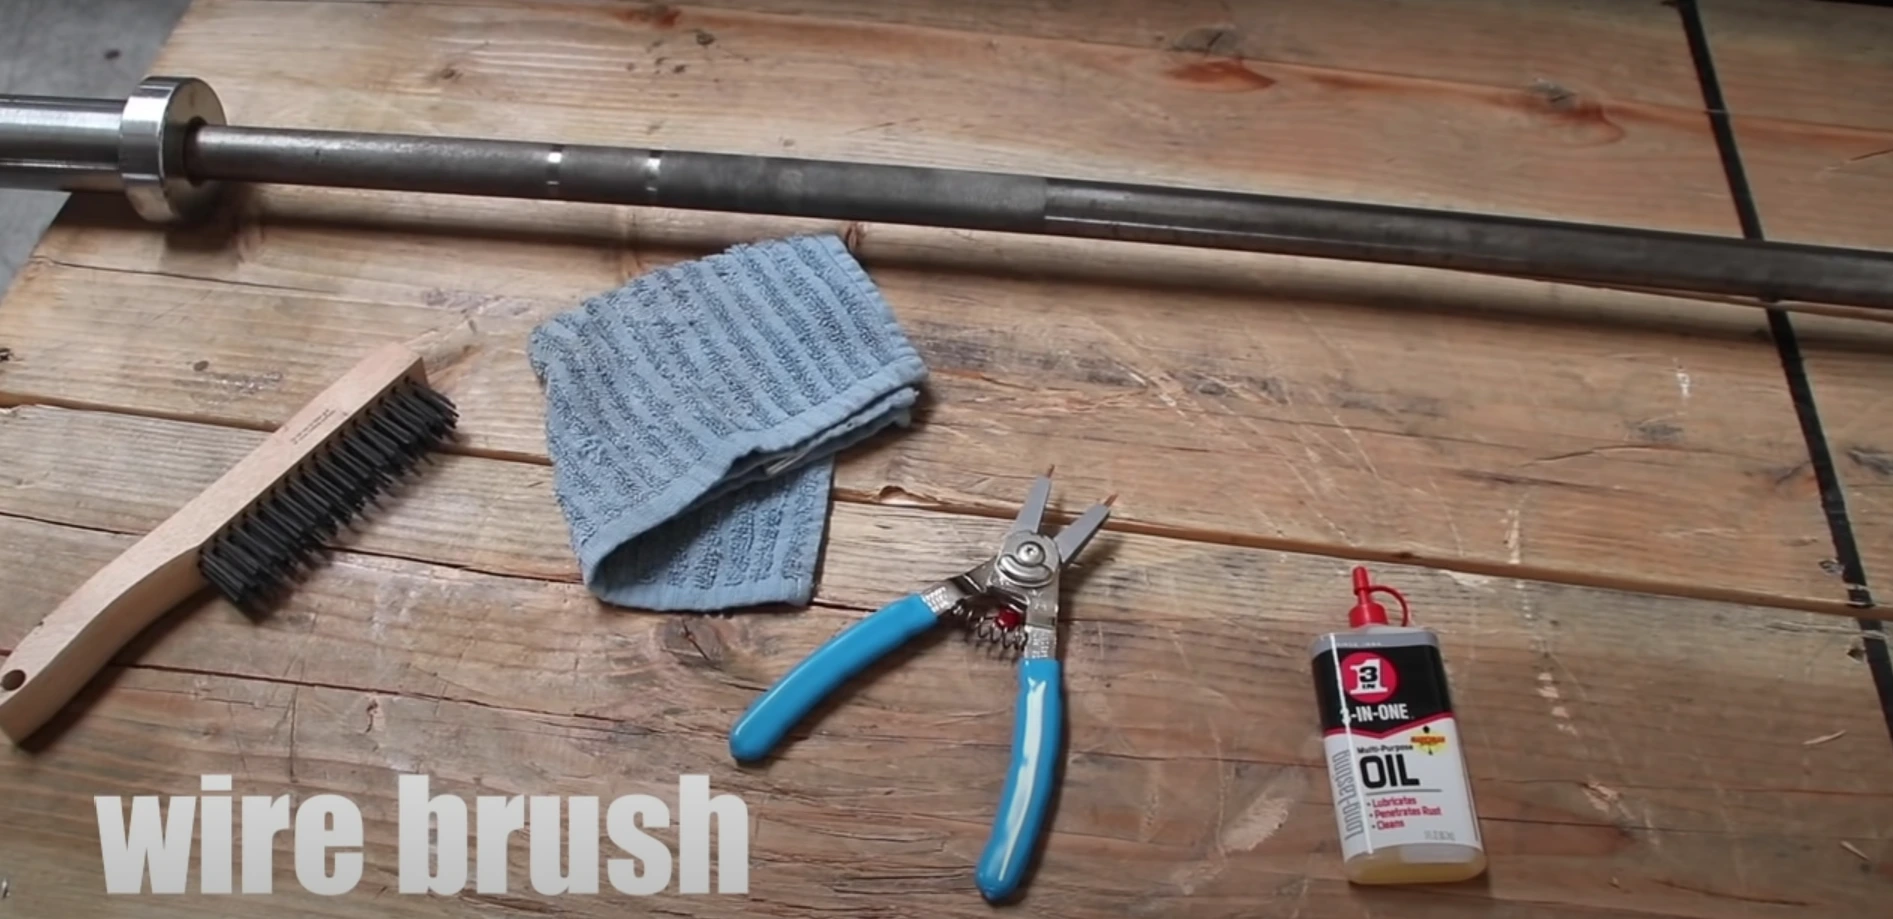 Things you would need to clean a barbell